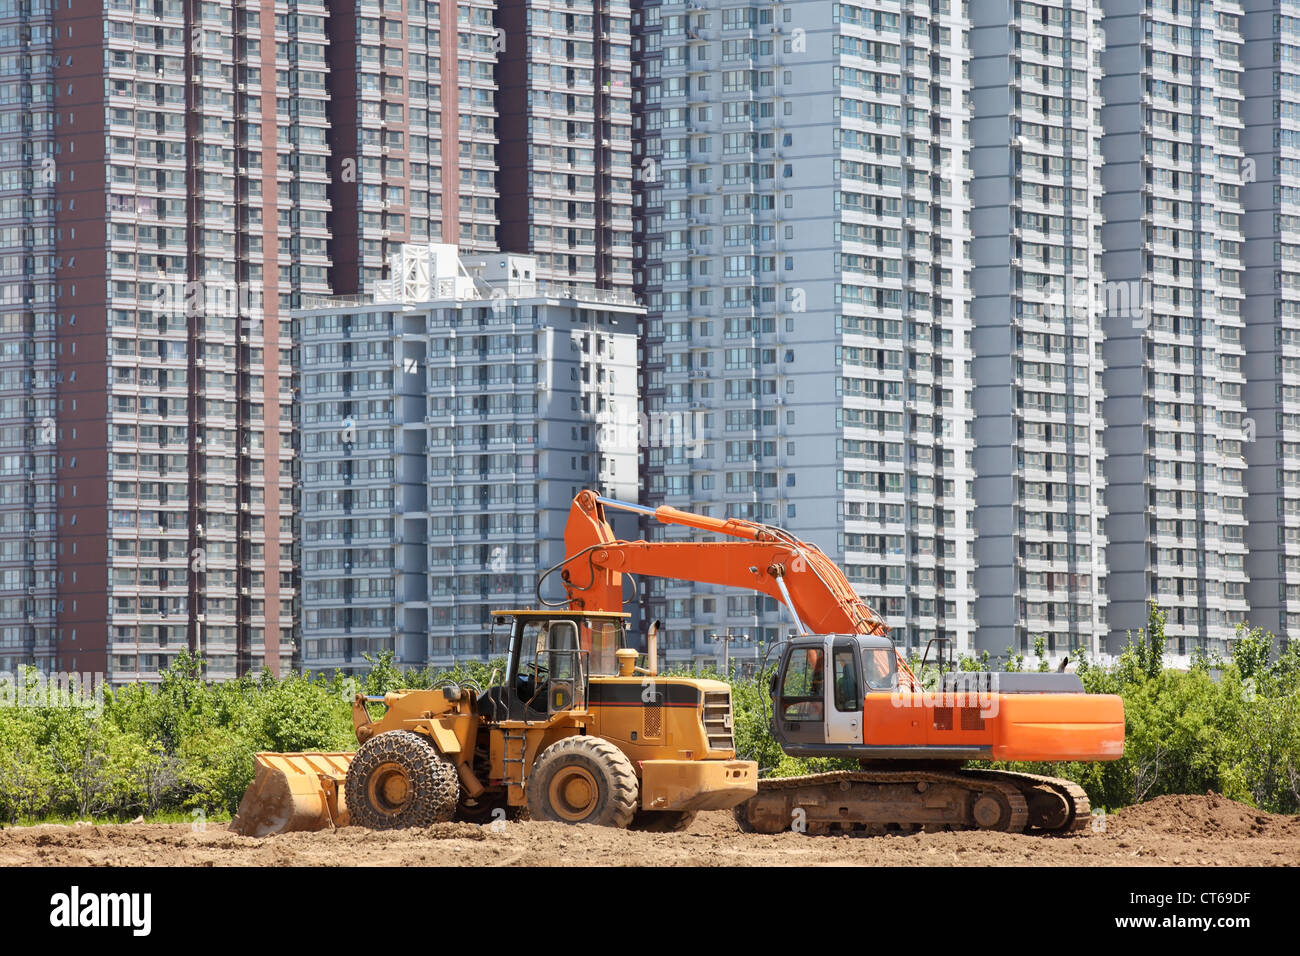 Urban residential community and construction vehicle. Stock Photo